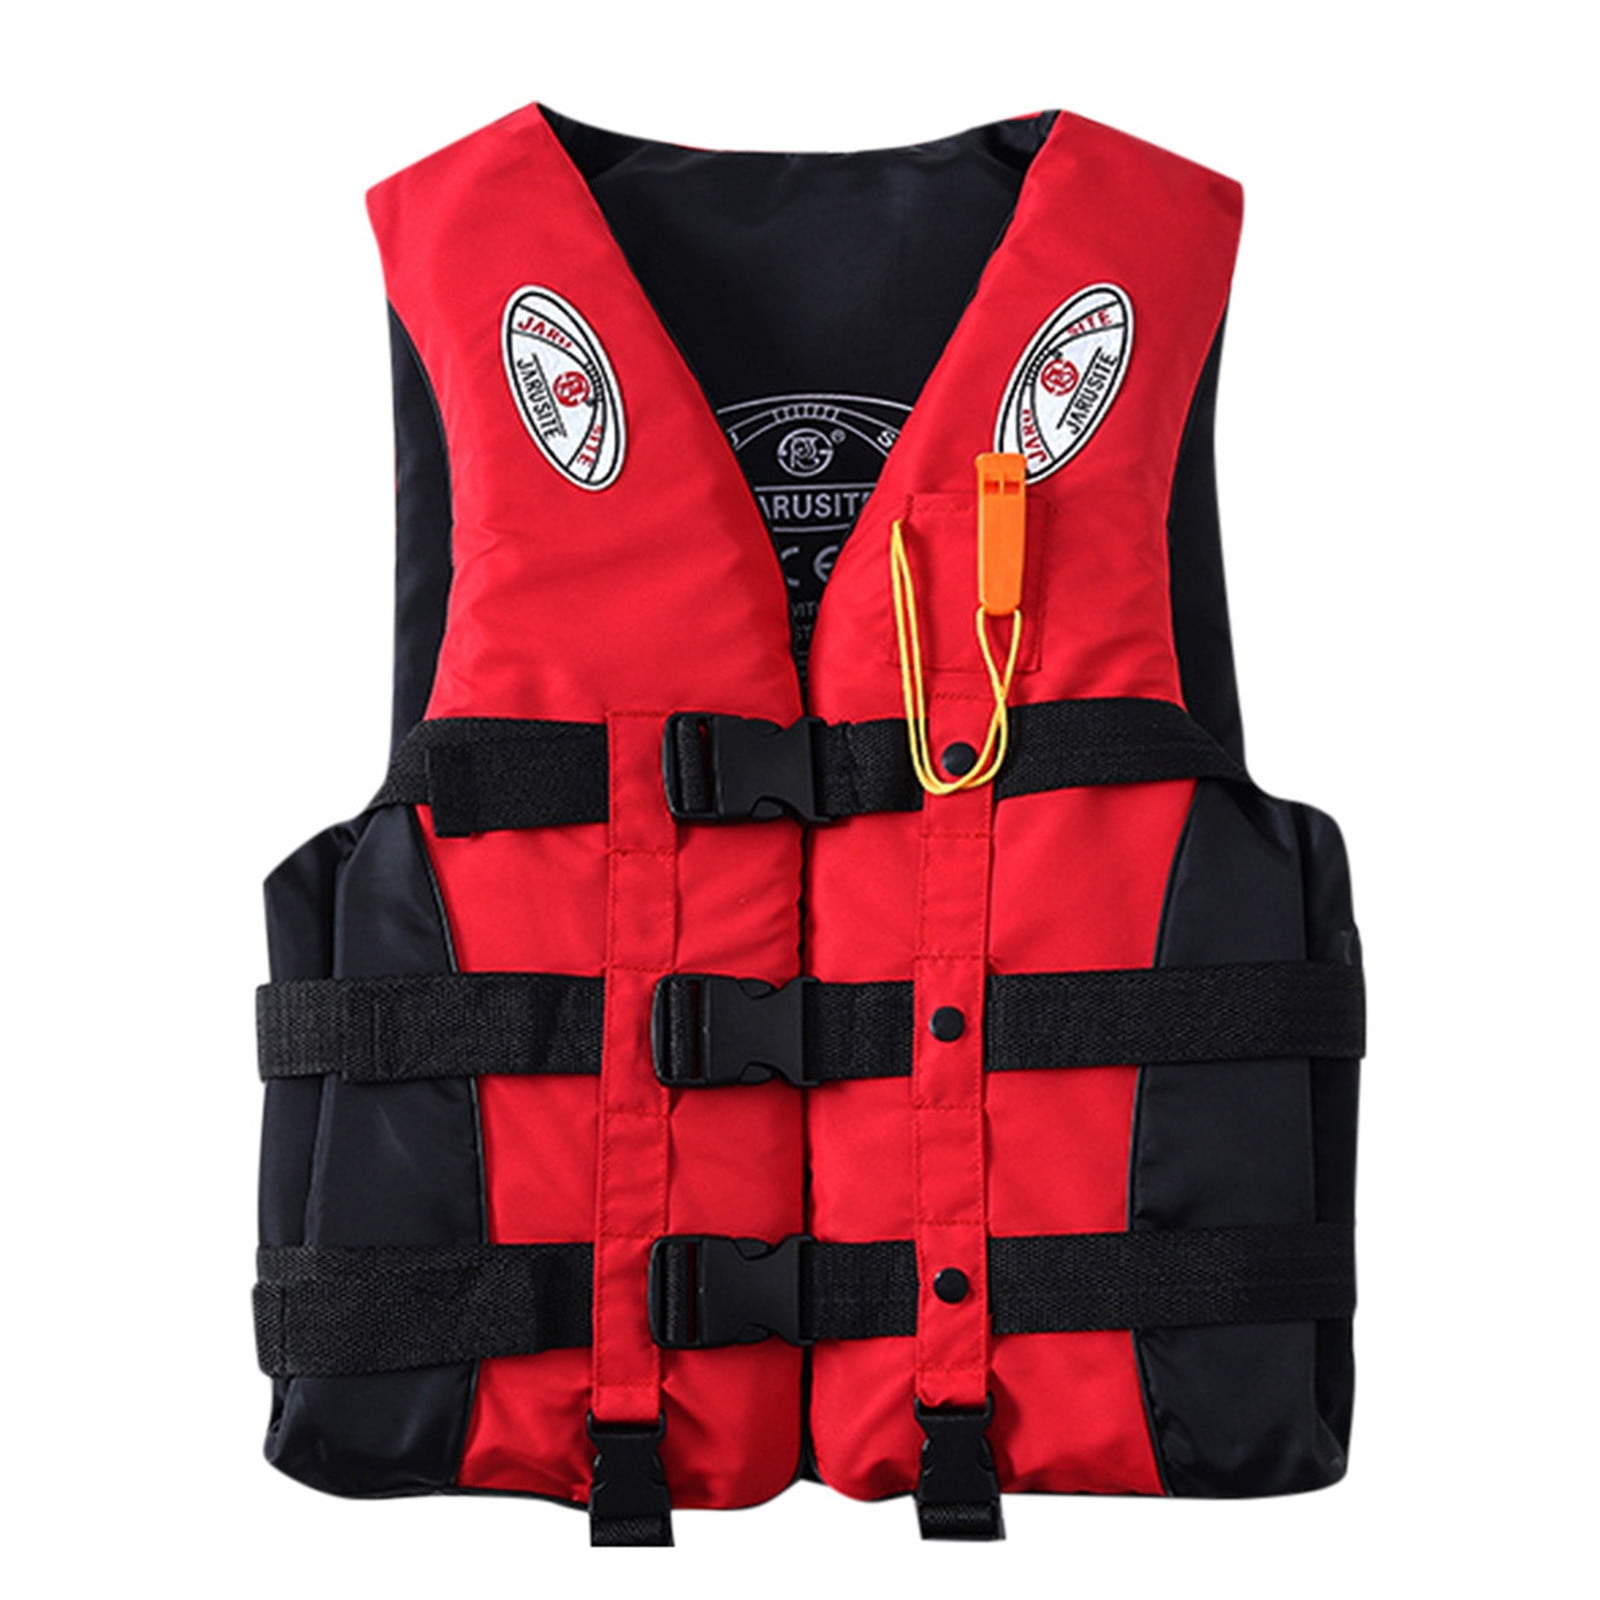 Men Women Personal Aid Jacket SuperUS Life Vset & Jackets Water Sport Boating Jacket for Adults Outdoor Sports Vest Adults Jacket Water Sport Buoyancy Waistcoat,Lifevest for Adult 